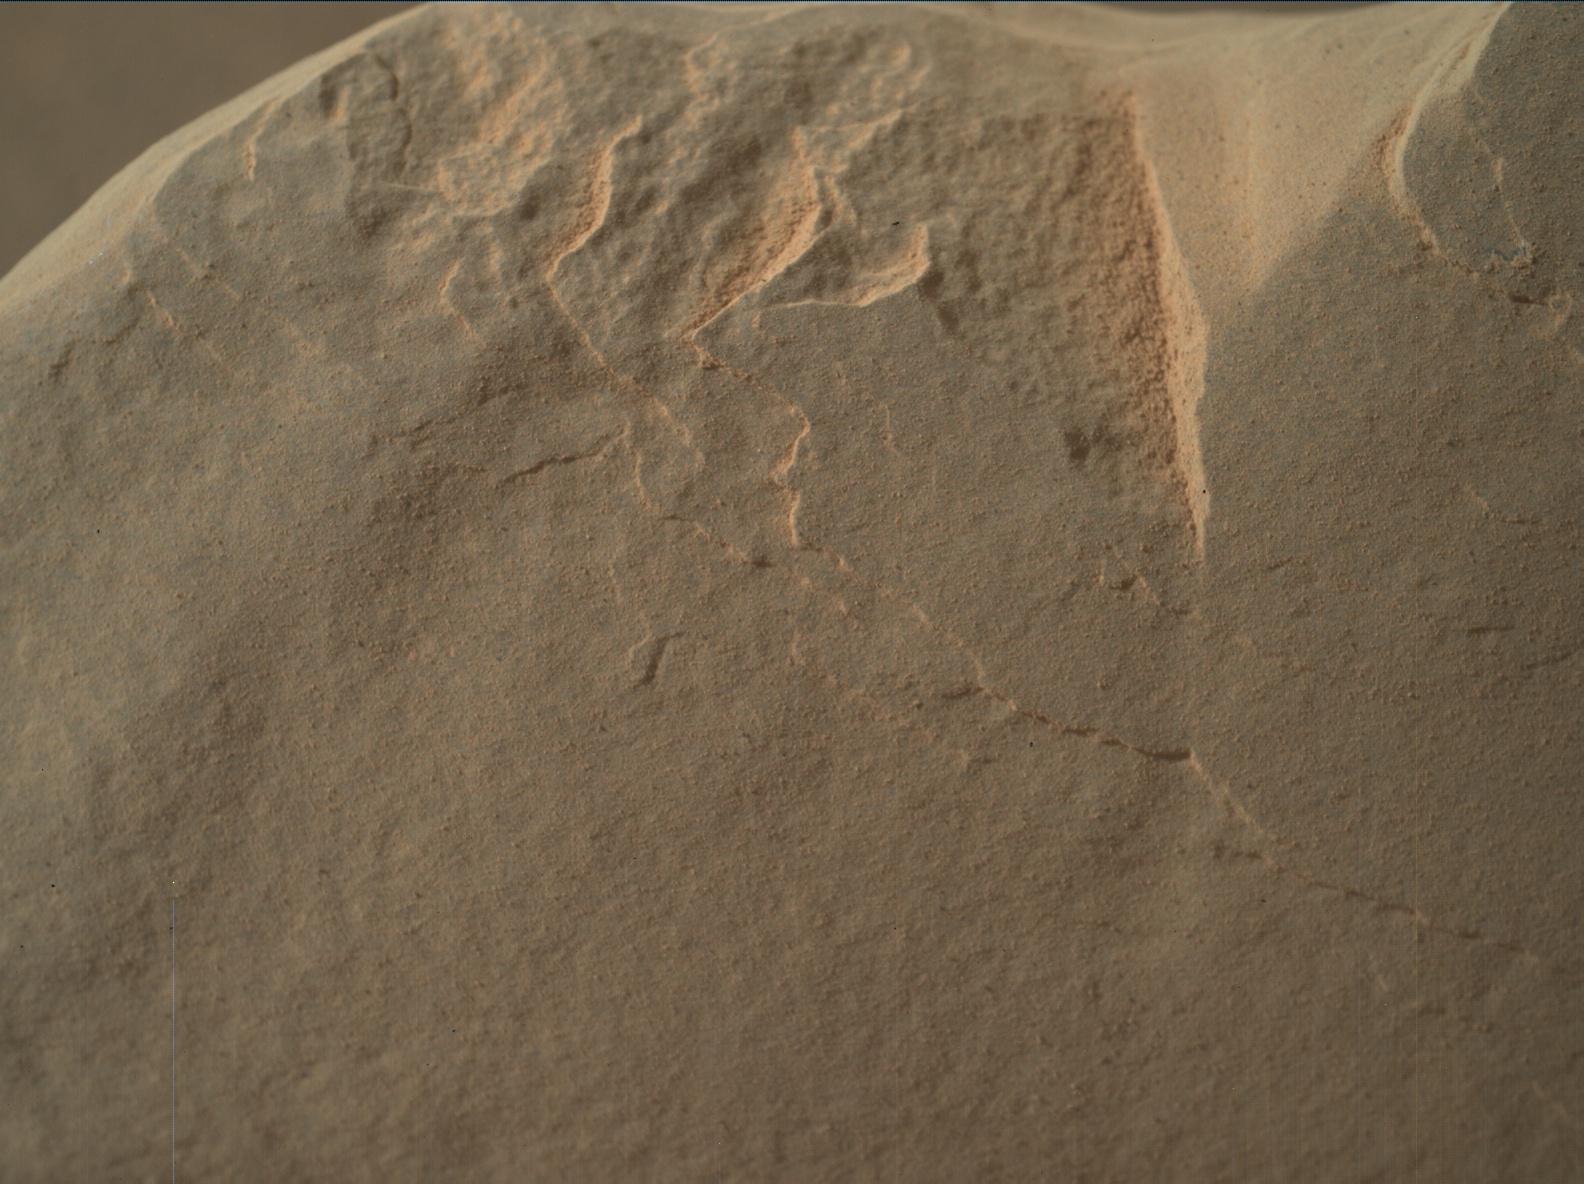 Nasa's Mars rover Curiosity acquired this image using its Mars Hand Lens Imager (MAHLI) on Sol 3398